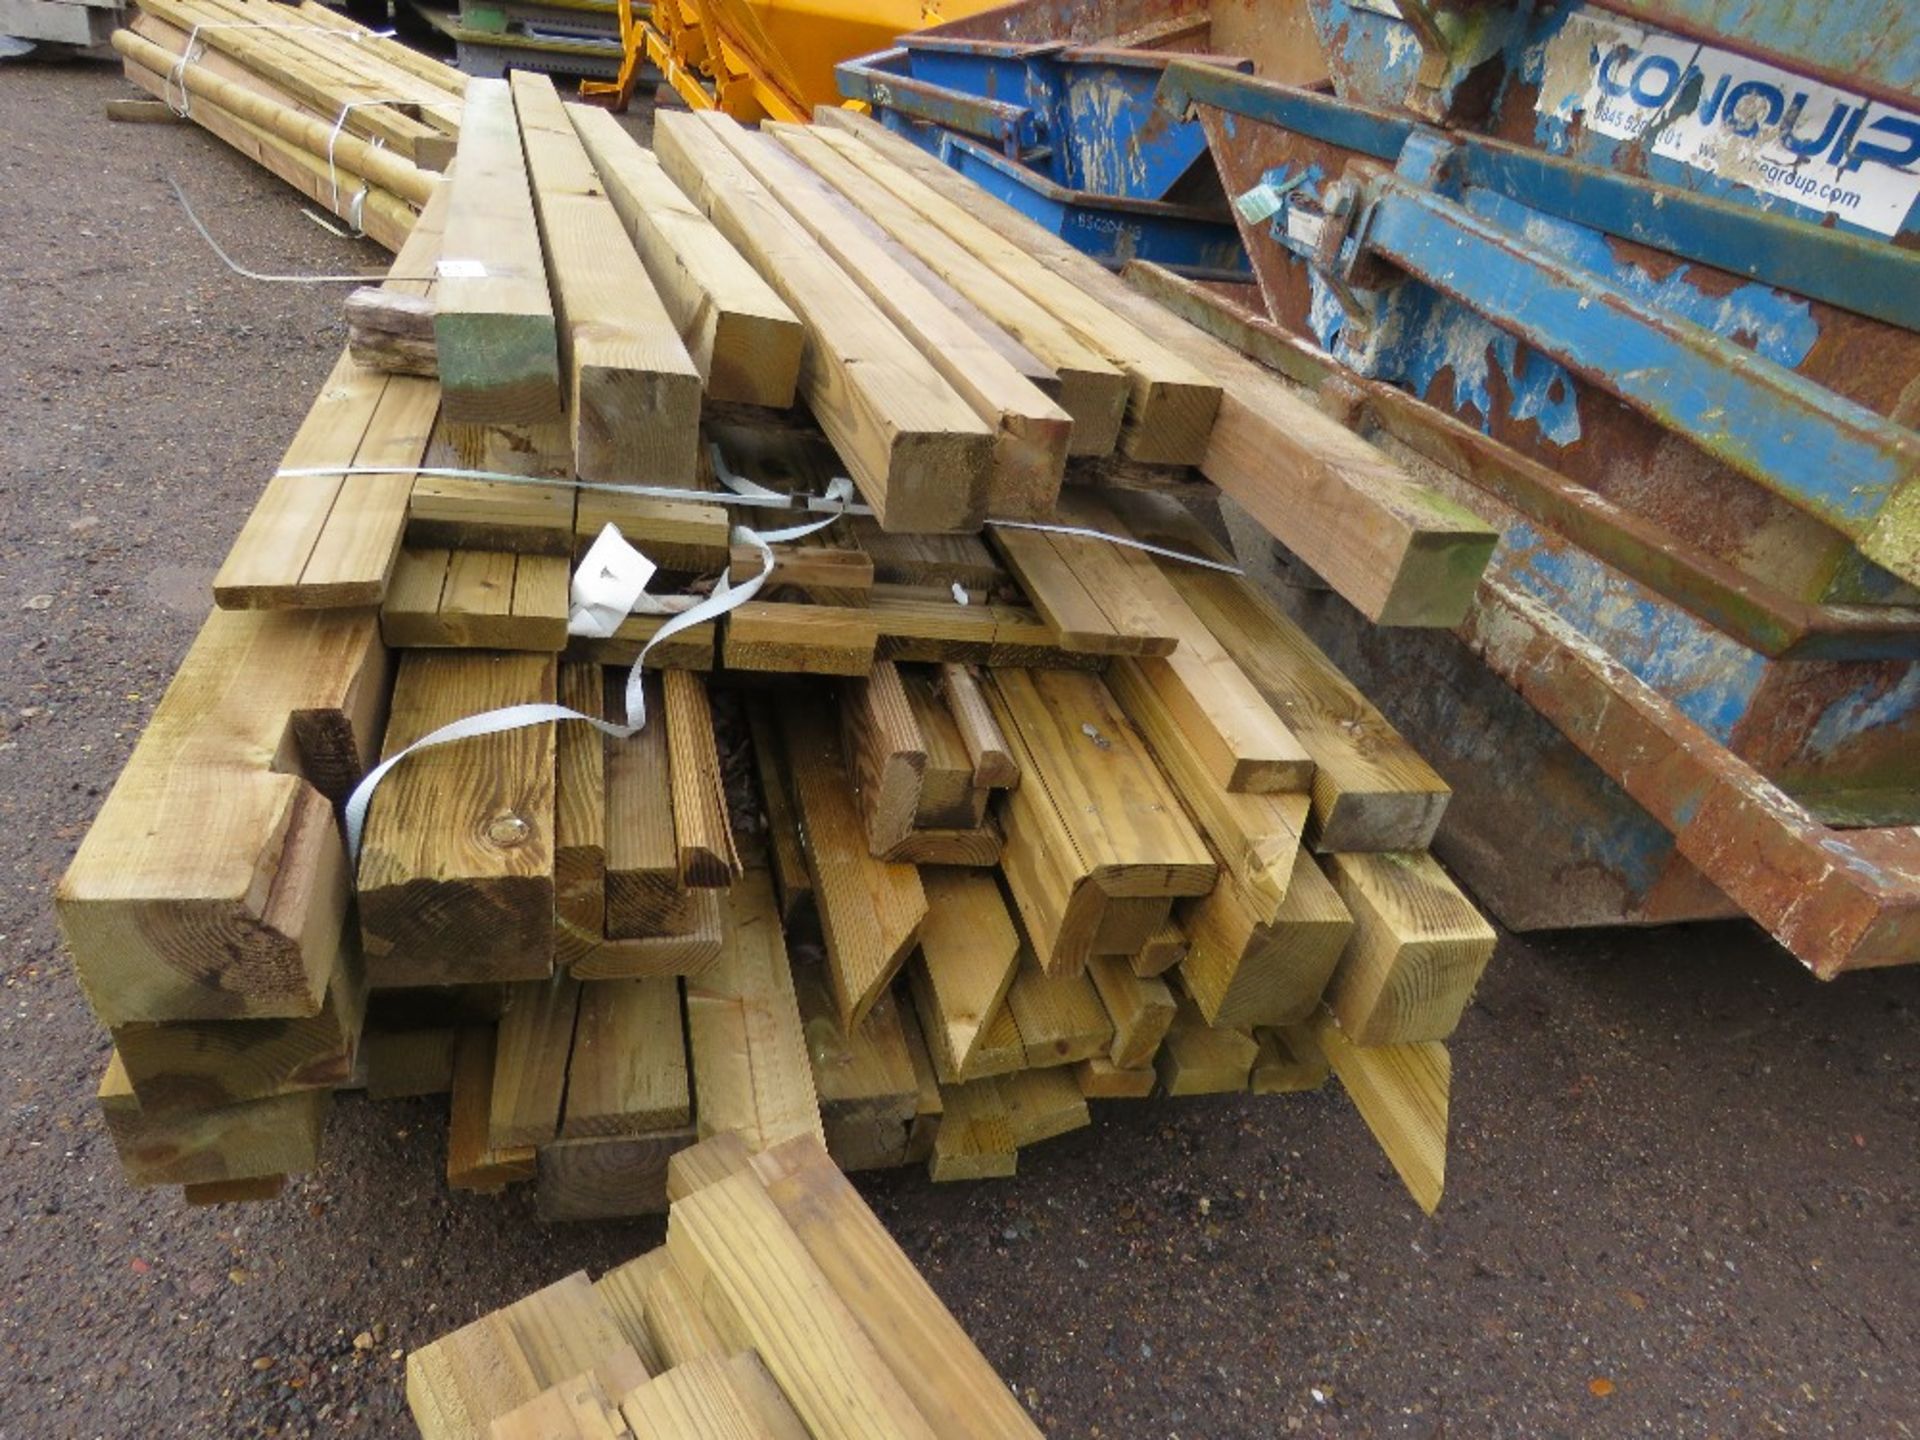 BUNDLE OF HEAVY DUTY TIMBERS AND POSTS 6-9FT LENGTH APPROX. - Image 2 of 4